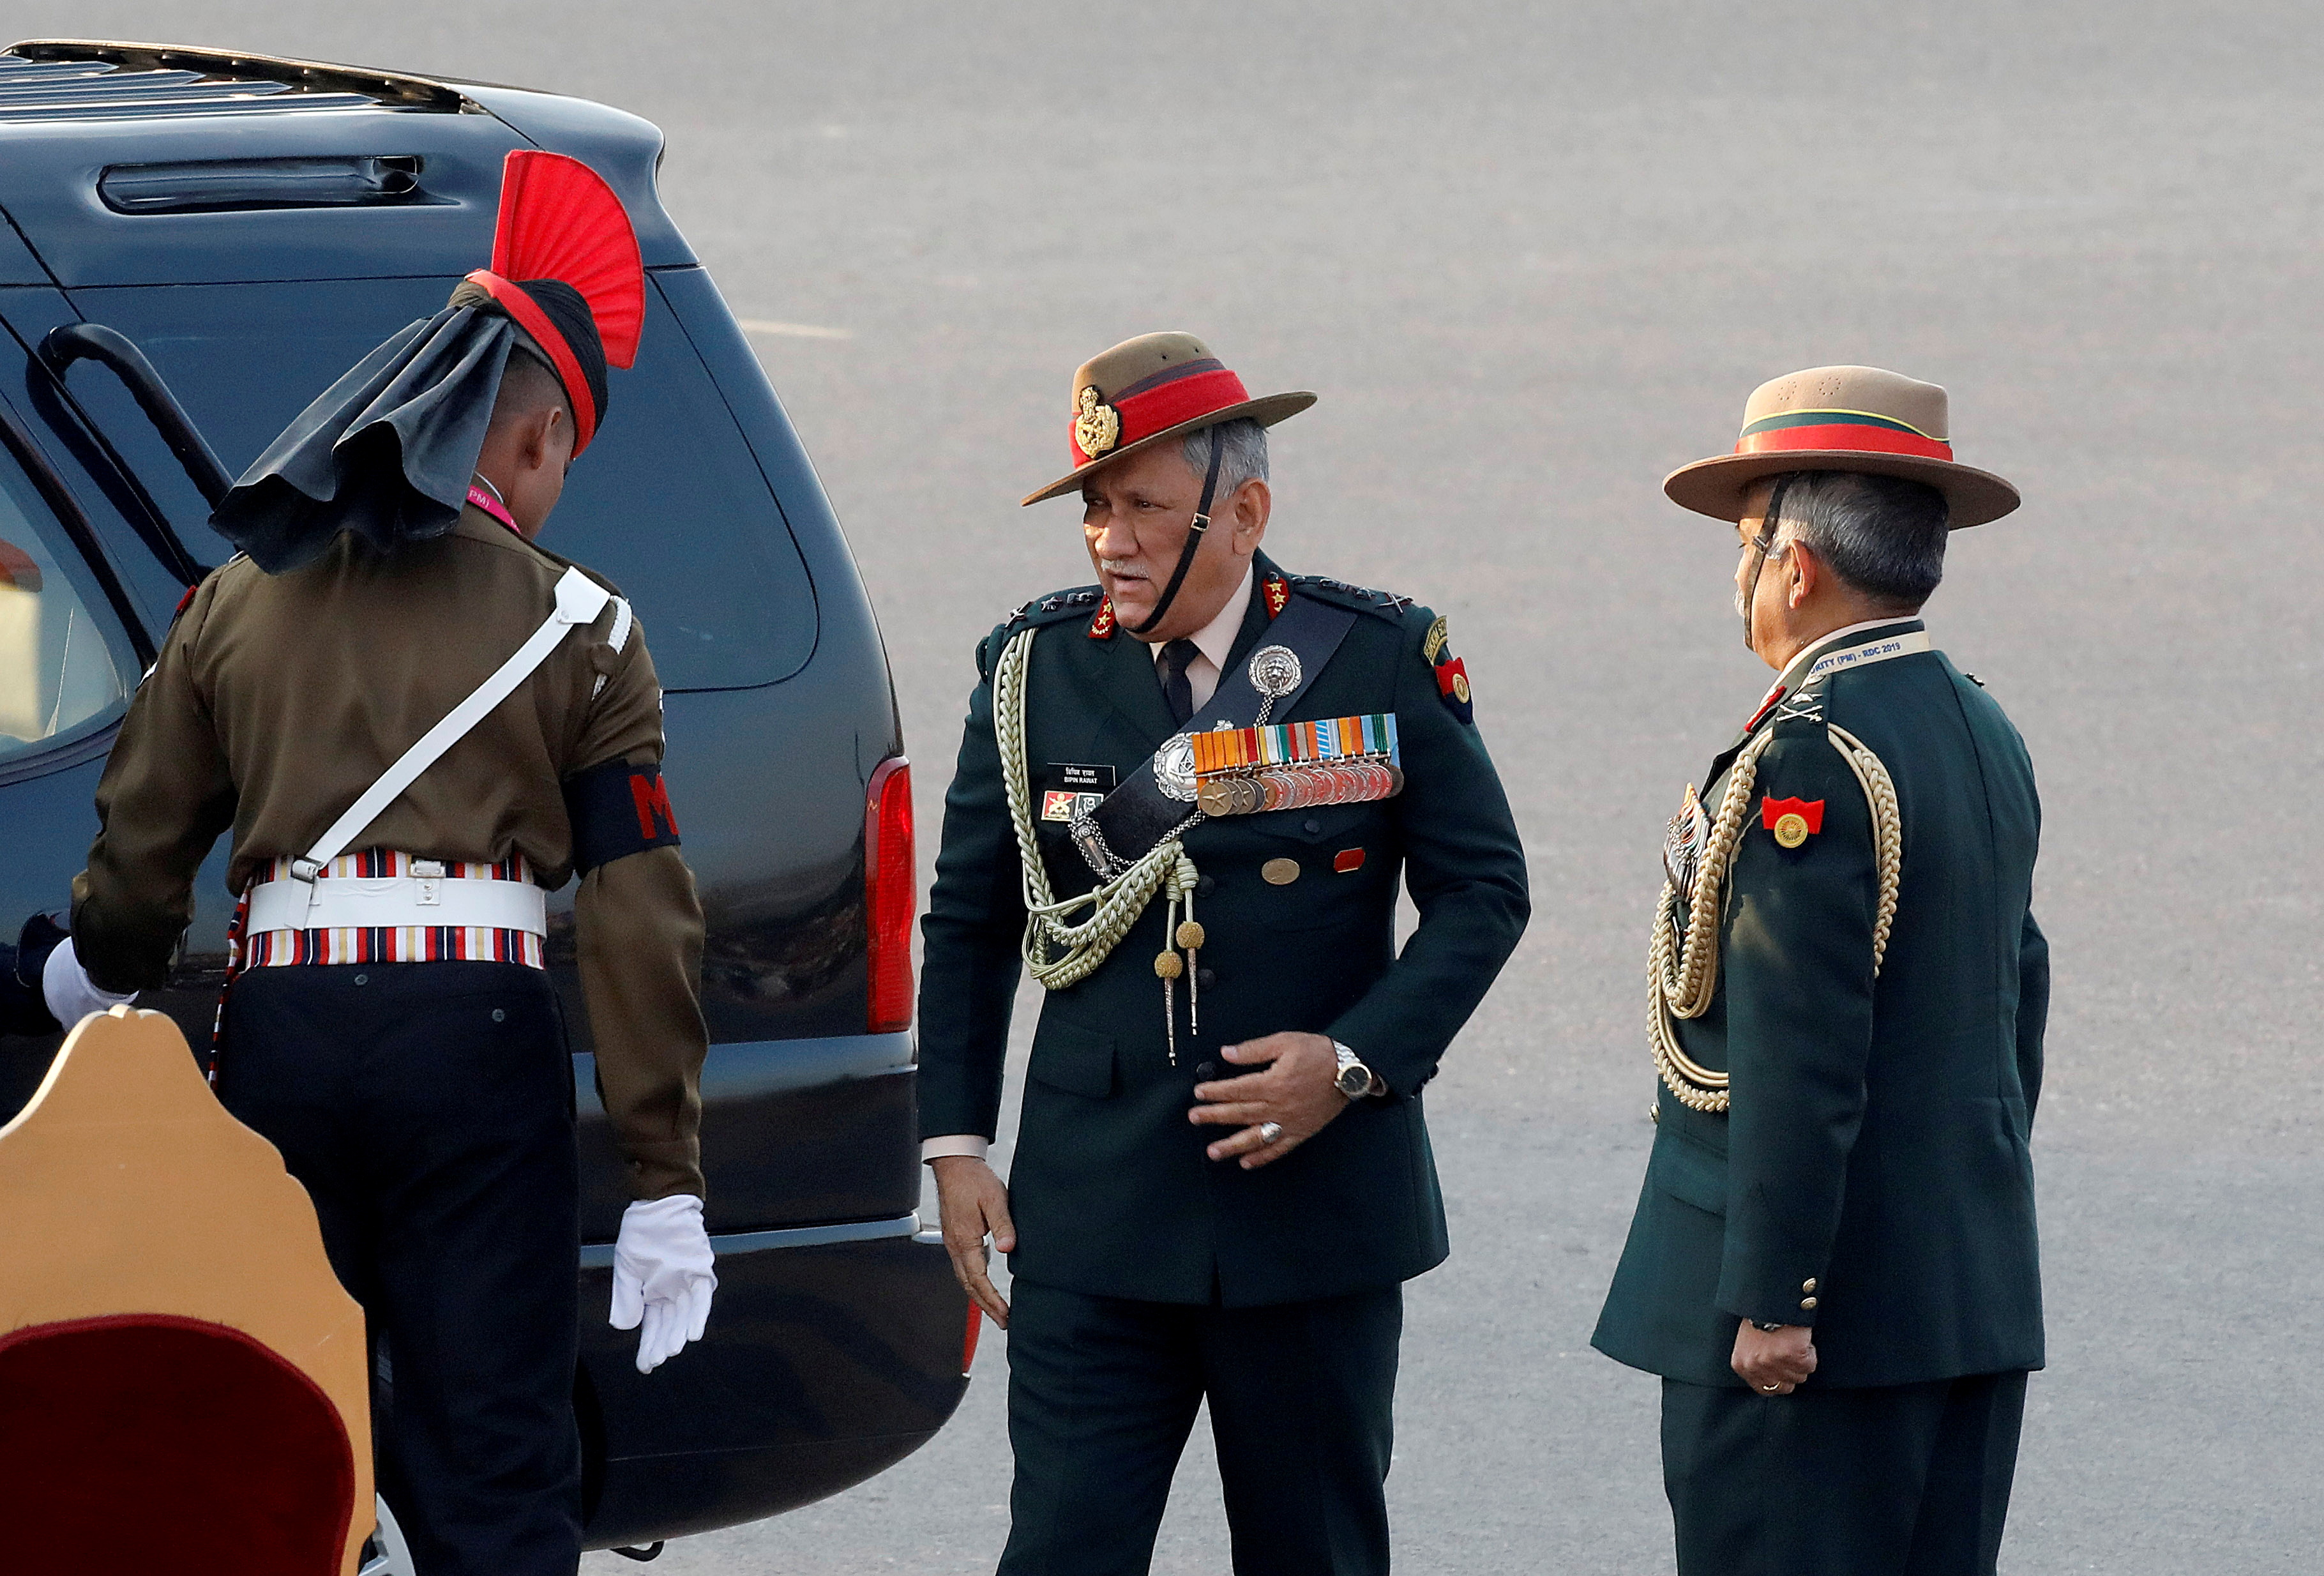 Indian Army chief General Bipin Rawat arrives for the Beating the Retreat ceremony in New Delhi, India, January 29, 2019. REUTERS/Altaf Hussain